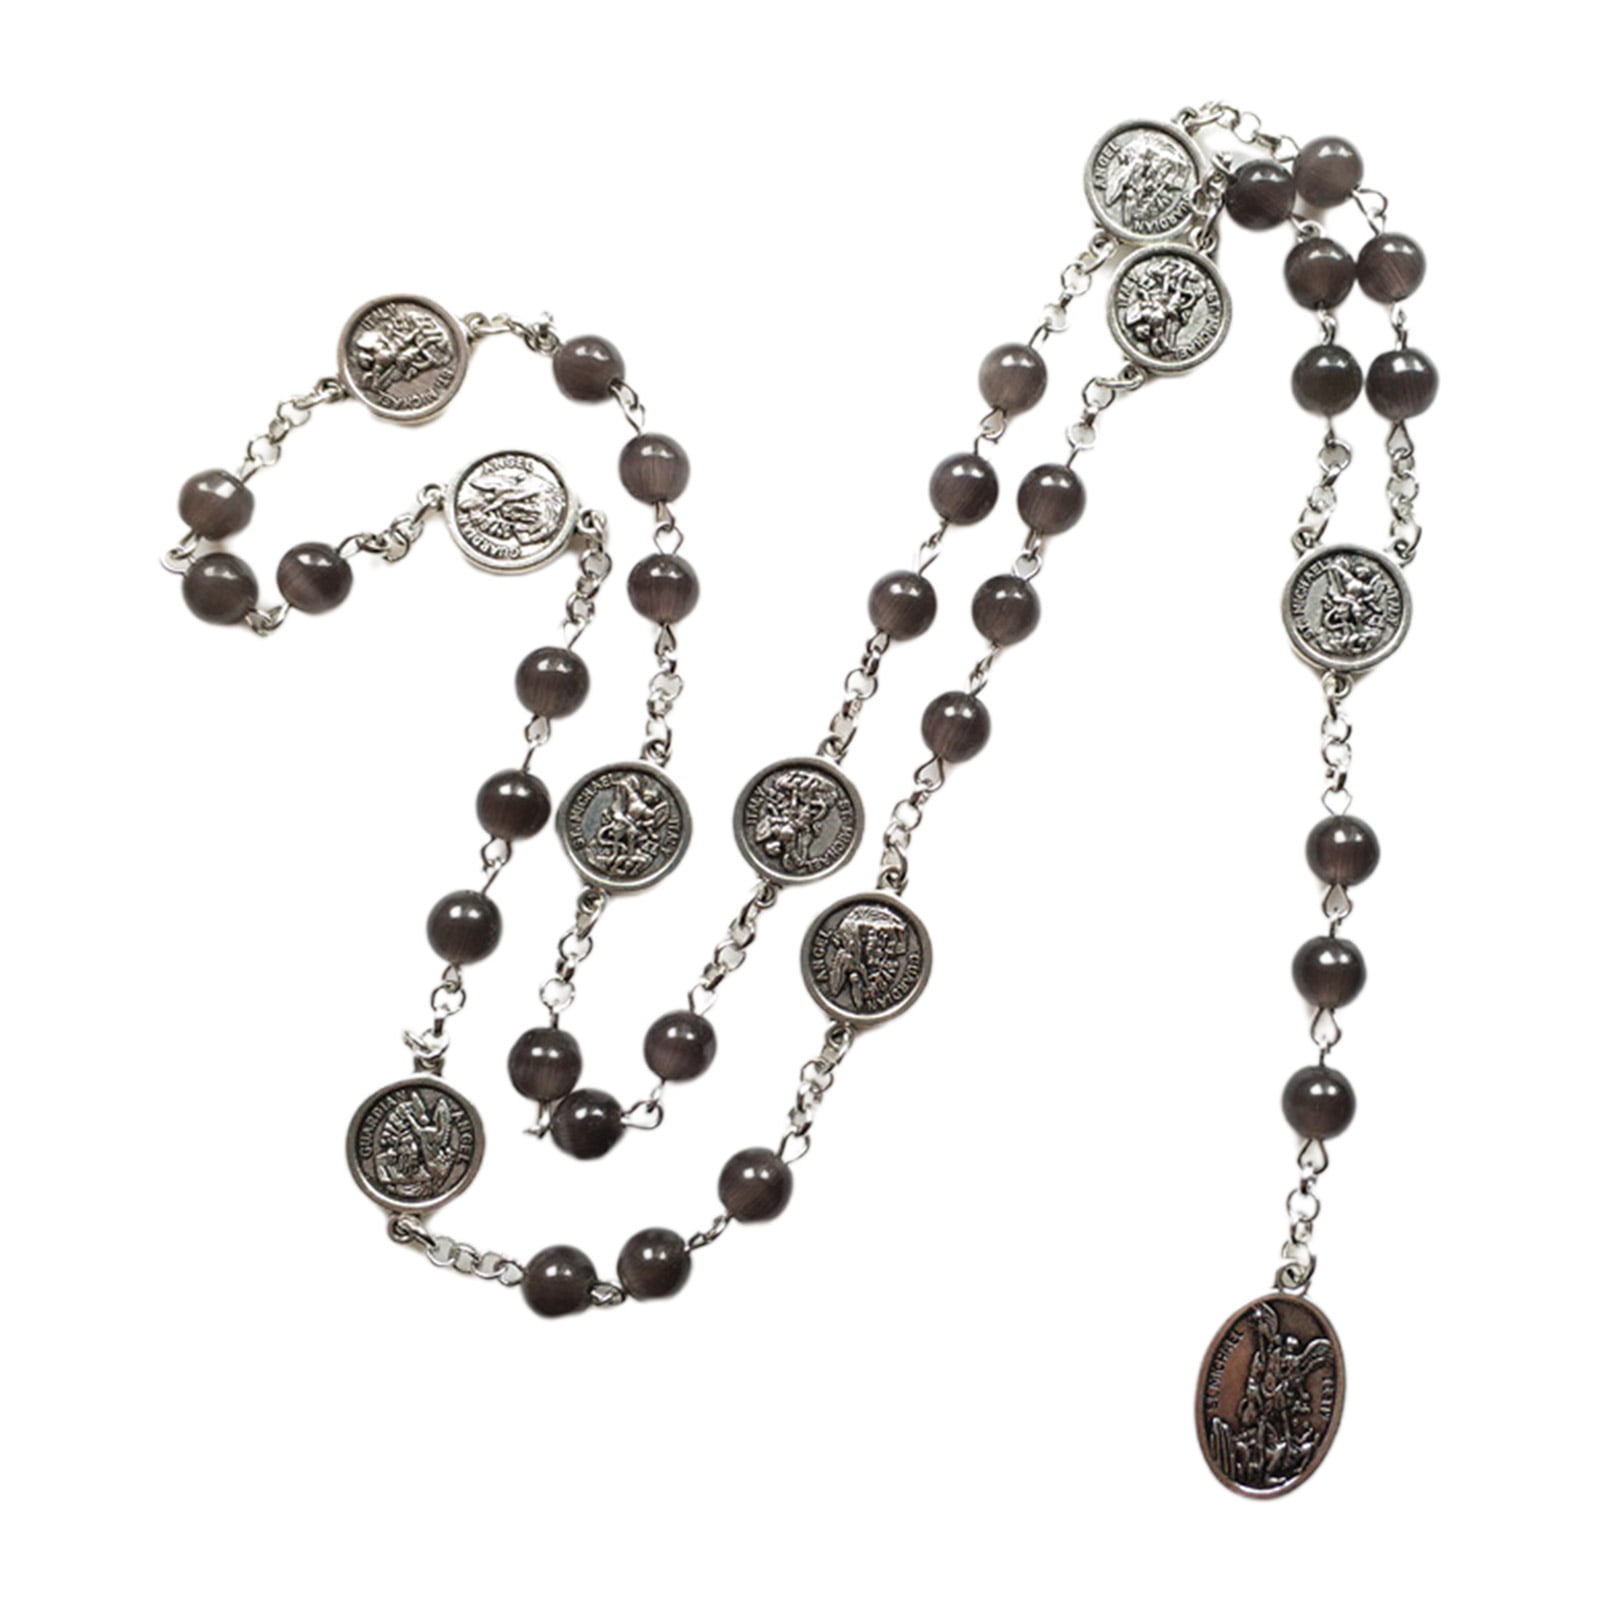 FaithHeart Saint Benedict Rosary Necklace with Holy Soil Medal Cross Crucifix Pendant 